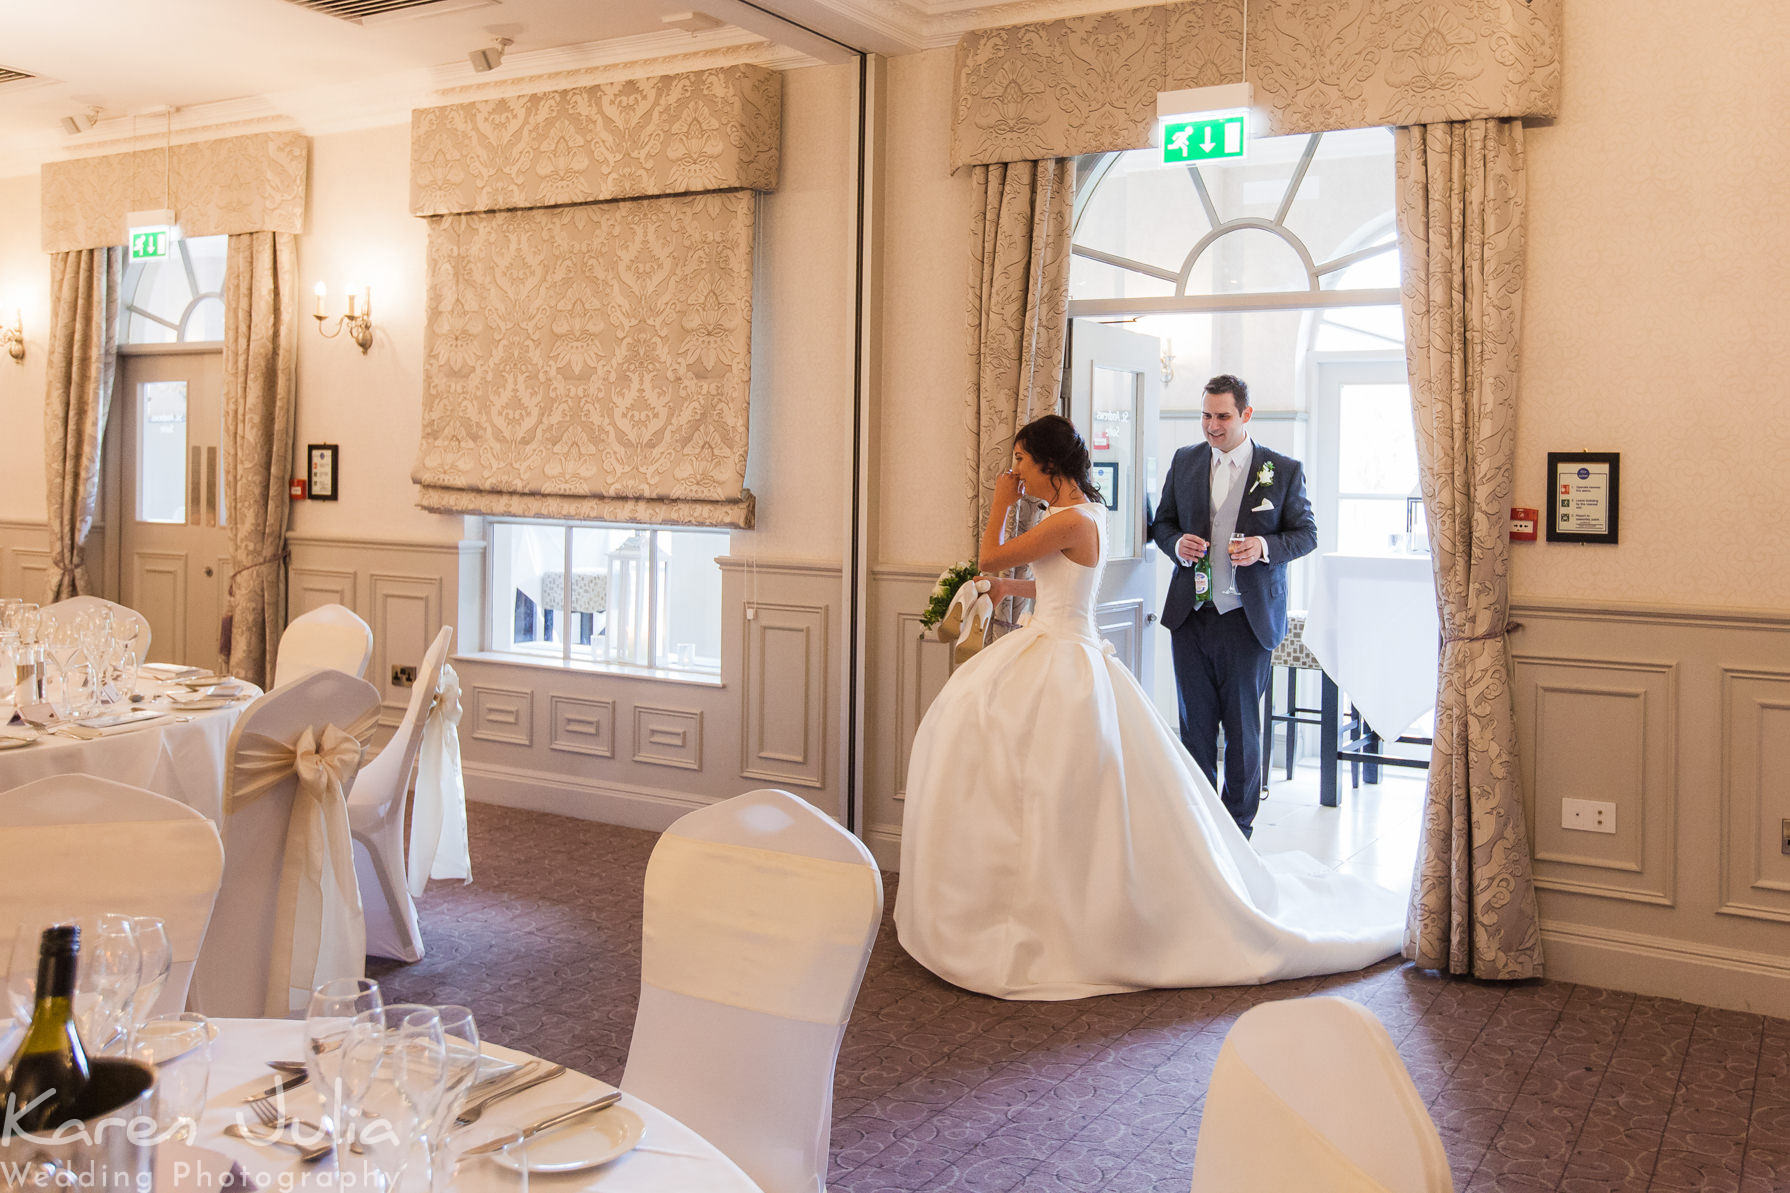 St Andrews Suite Mottram Hall, styled for a wedding